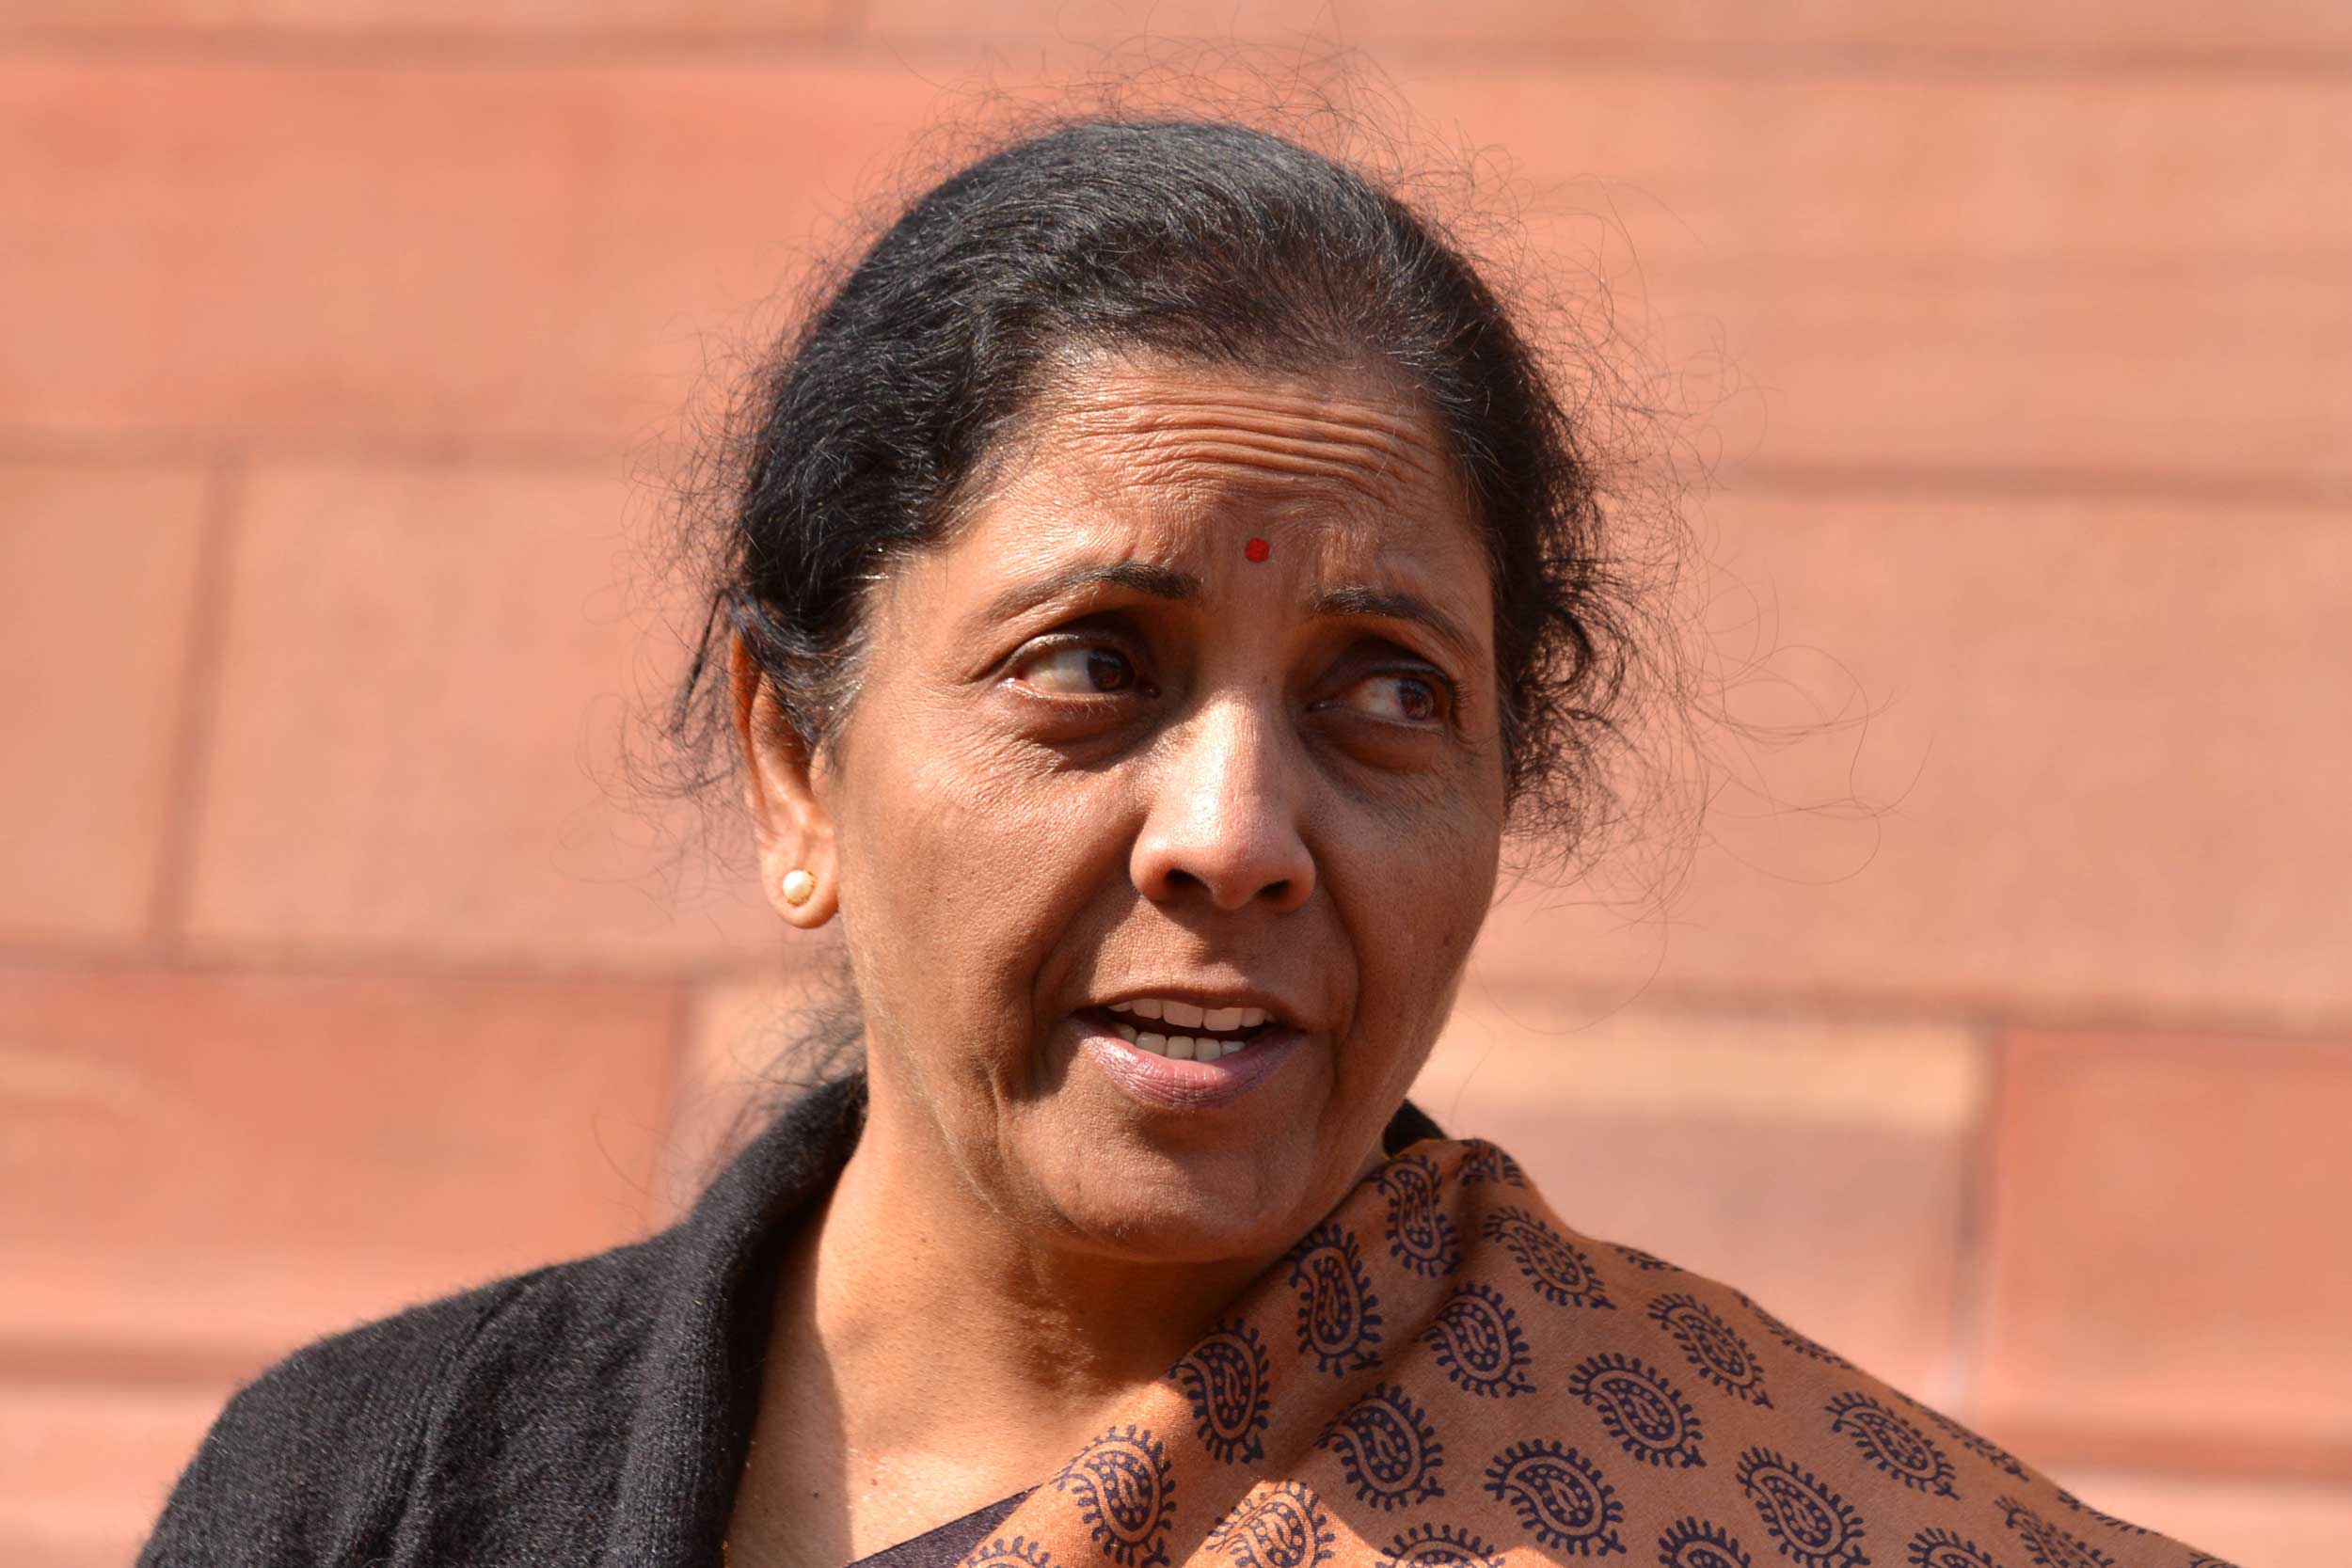 Nirmala Sitharaman has laid down a vision to make India a $5-trillion economy based on the “minimum government and maximum governance” mantra while reiterating its focus on “Gaon, Garib Aur Kisan” in all key initiatives.